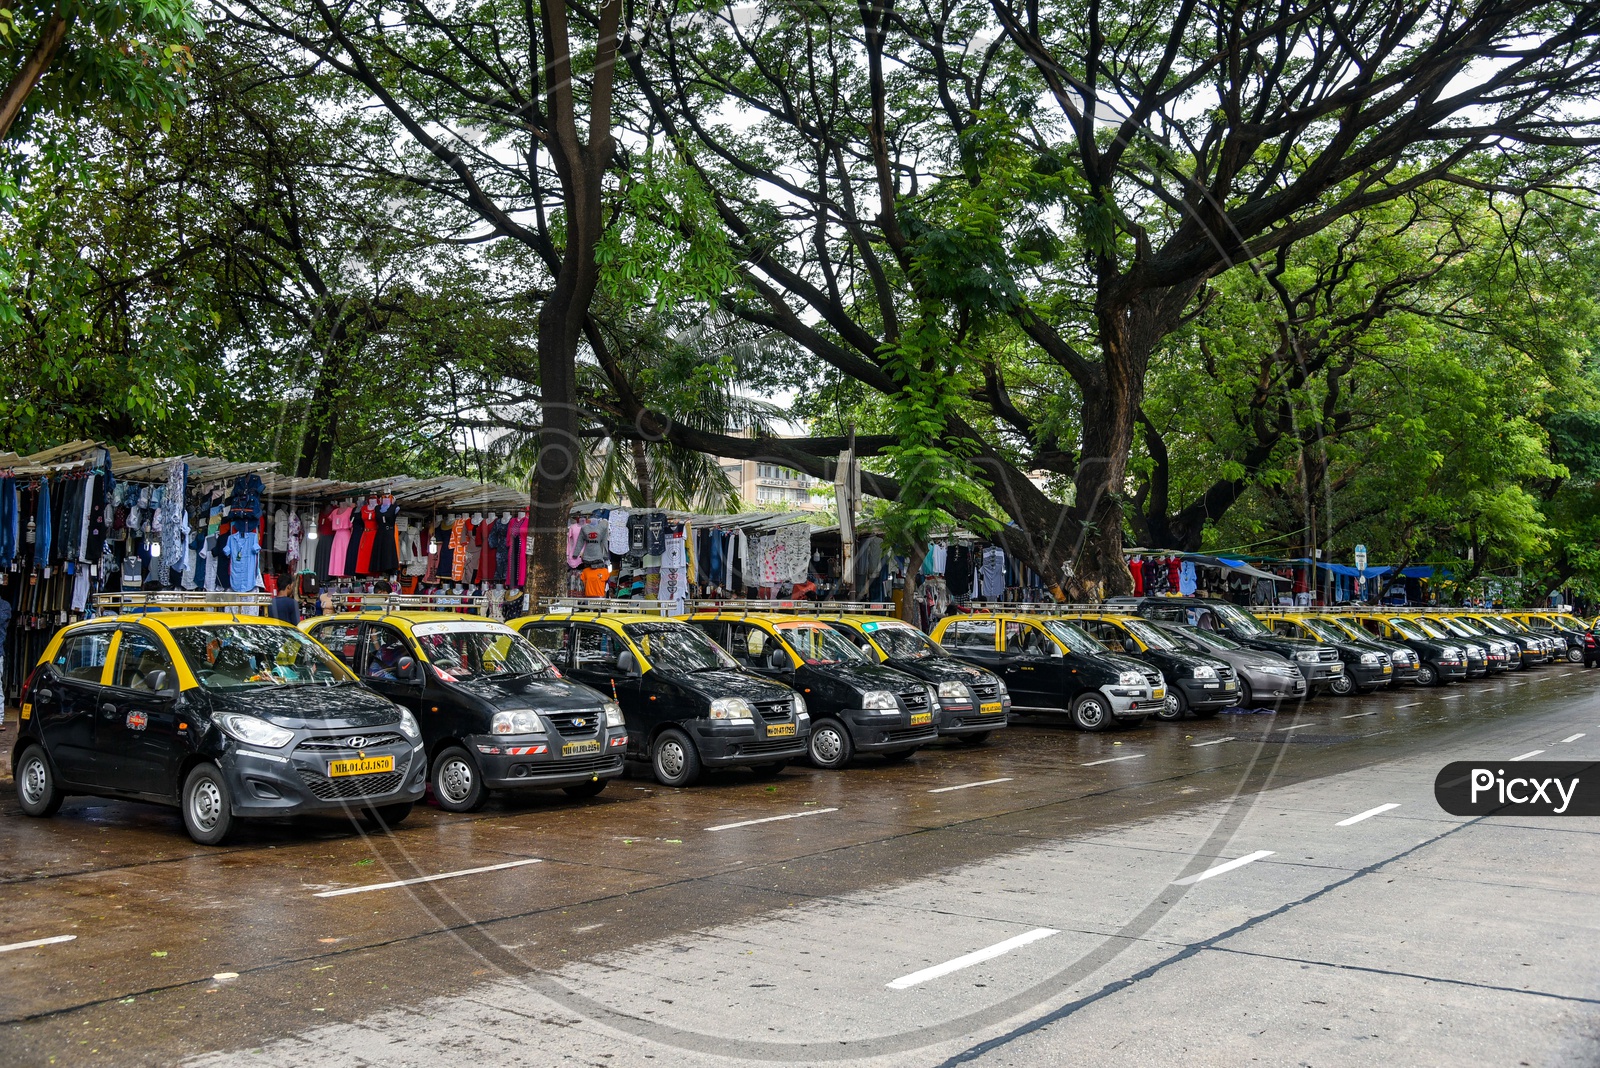 Taxis parked on a street in Mumbai